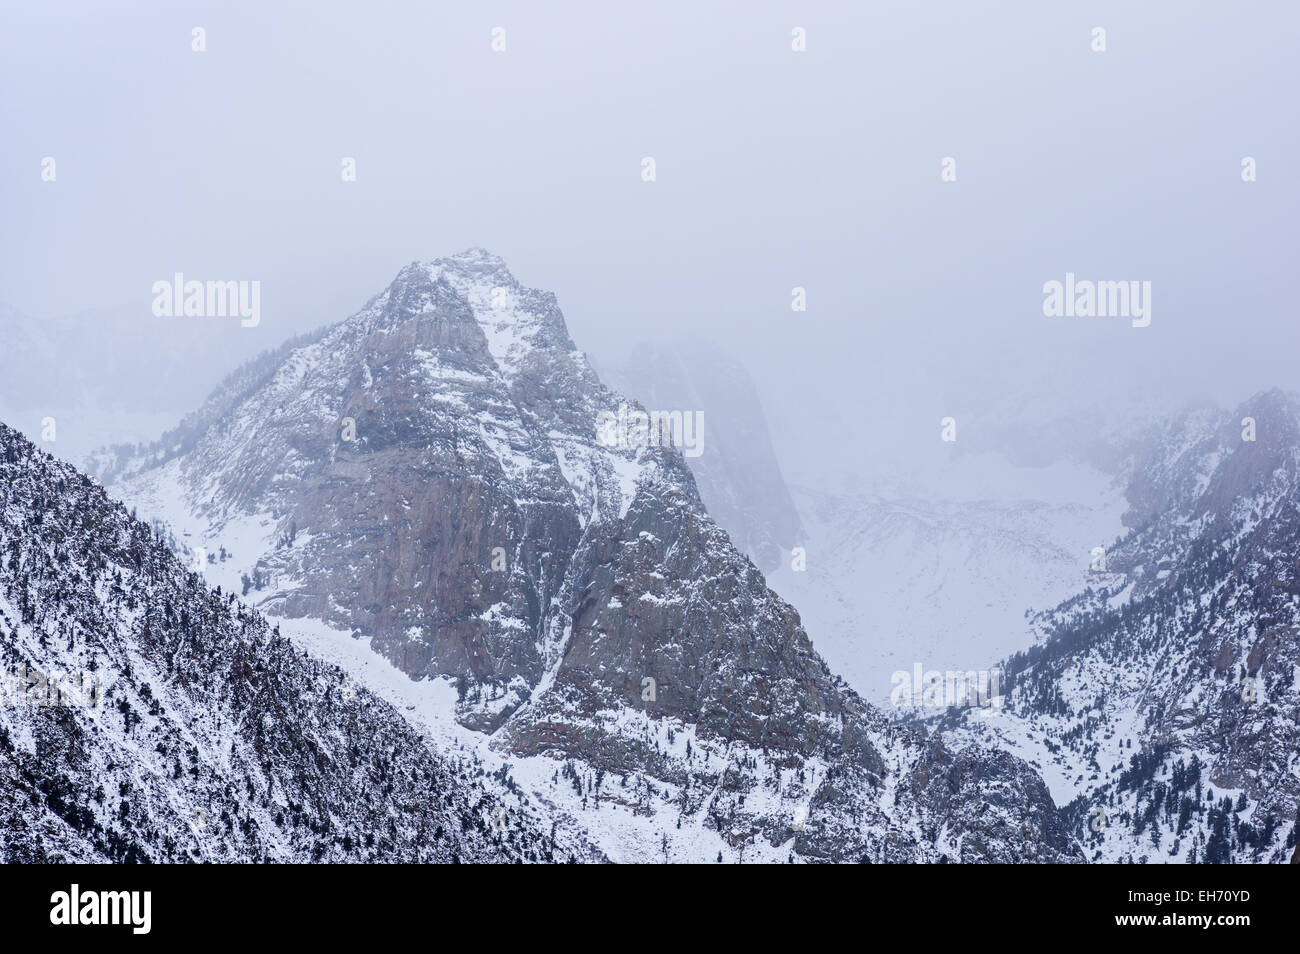 snowy mountains with peaks fading into the clouds Stock Photo